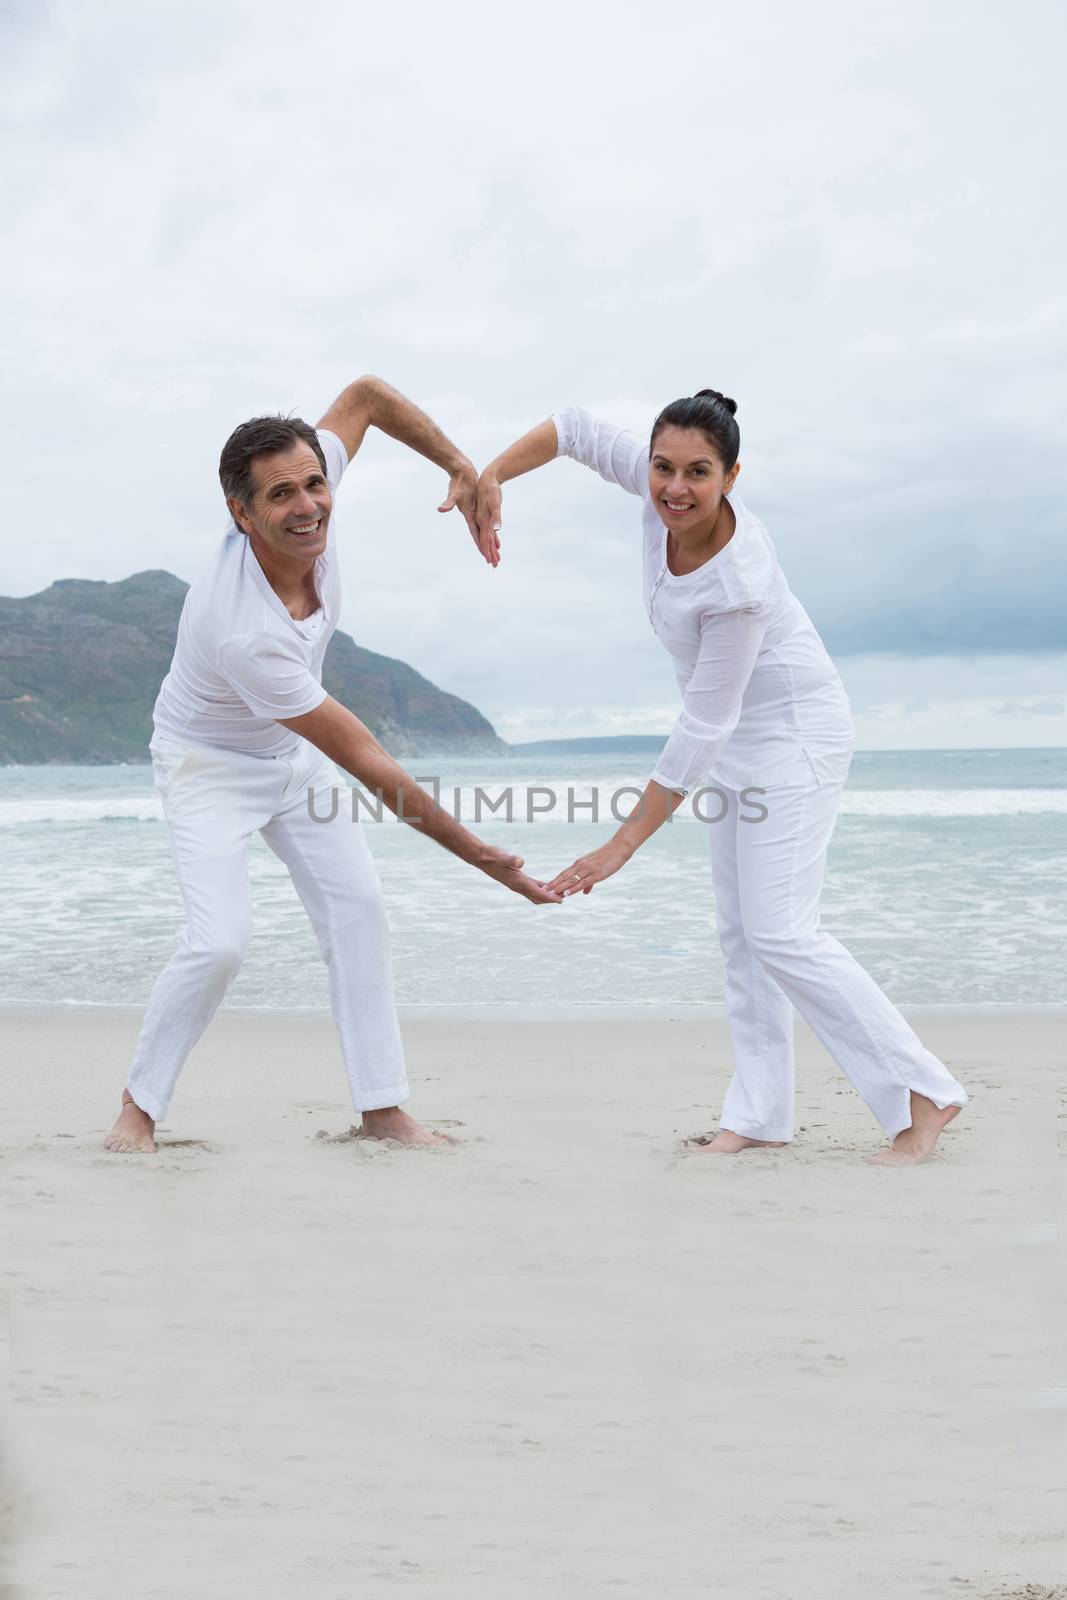 Romantic couple making heart by hands on beach during winter